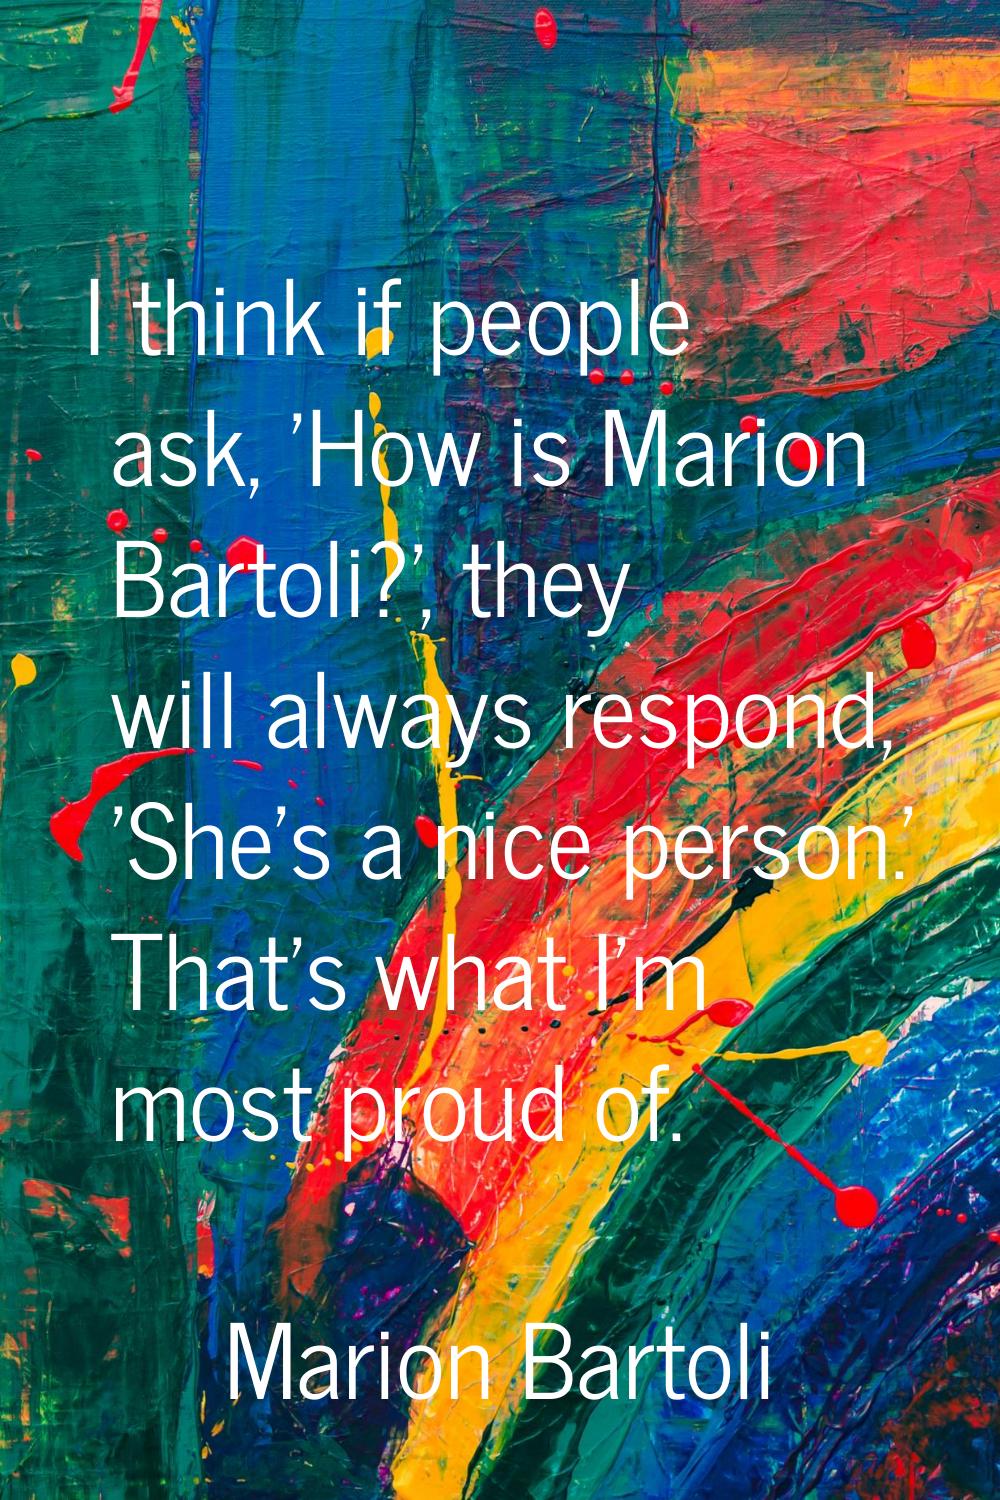 I think if people ask, 'How is Marion Bartoli?', they will always respond, 'She's a nice person.' T